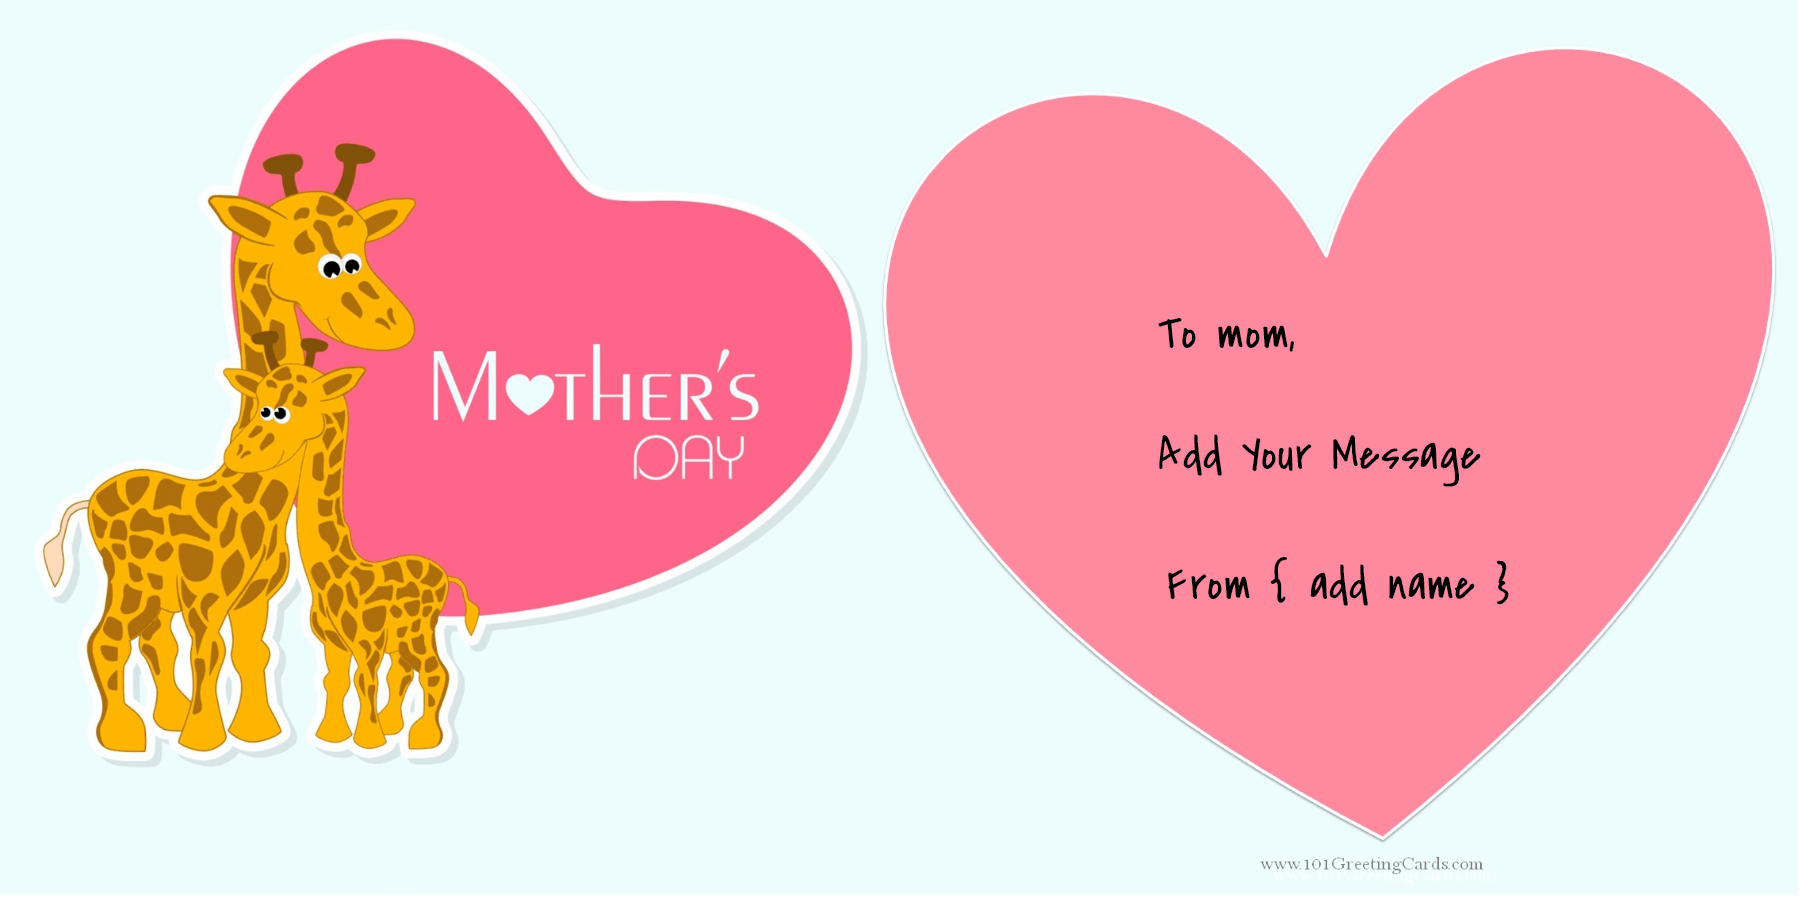 clipart mother day cards - photo #21